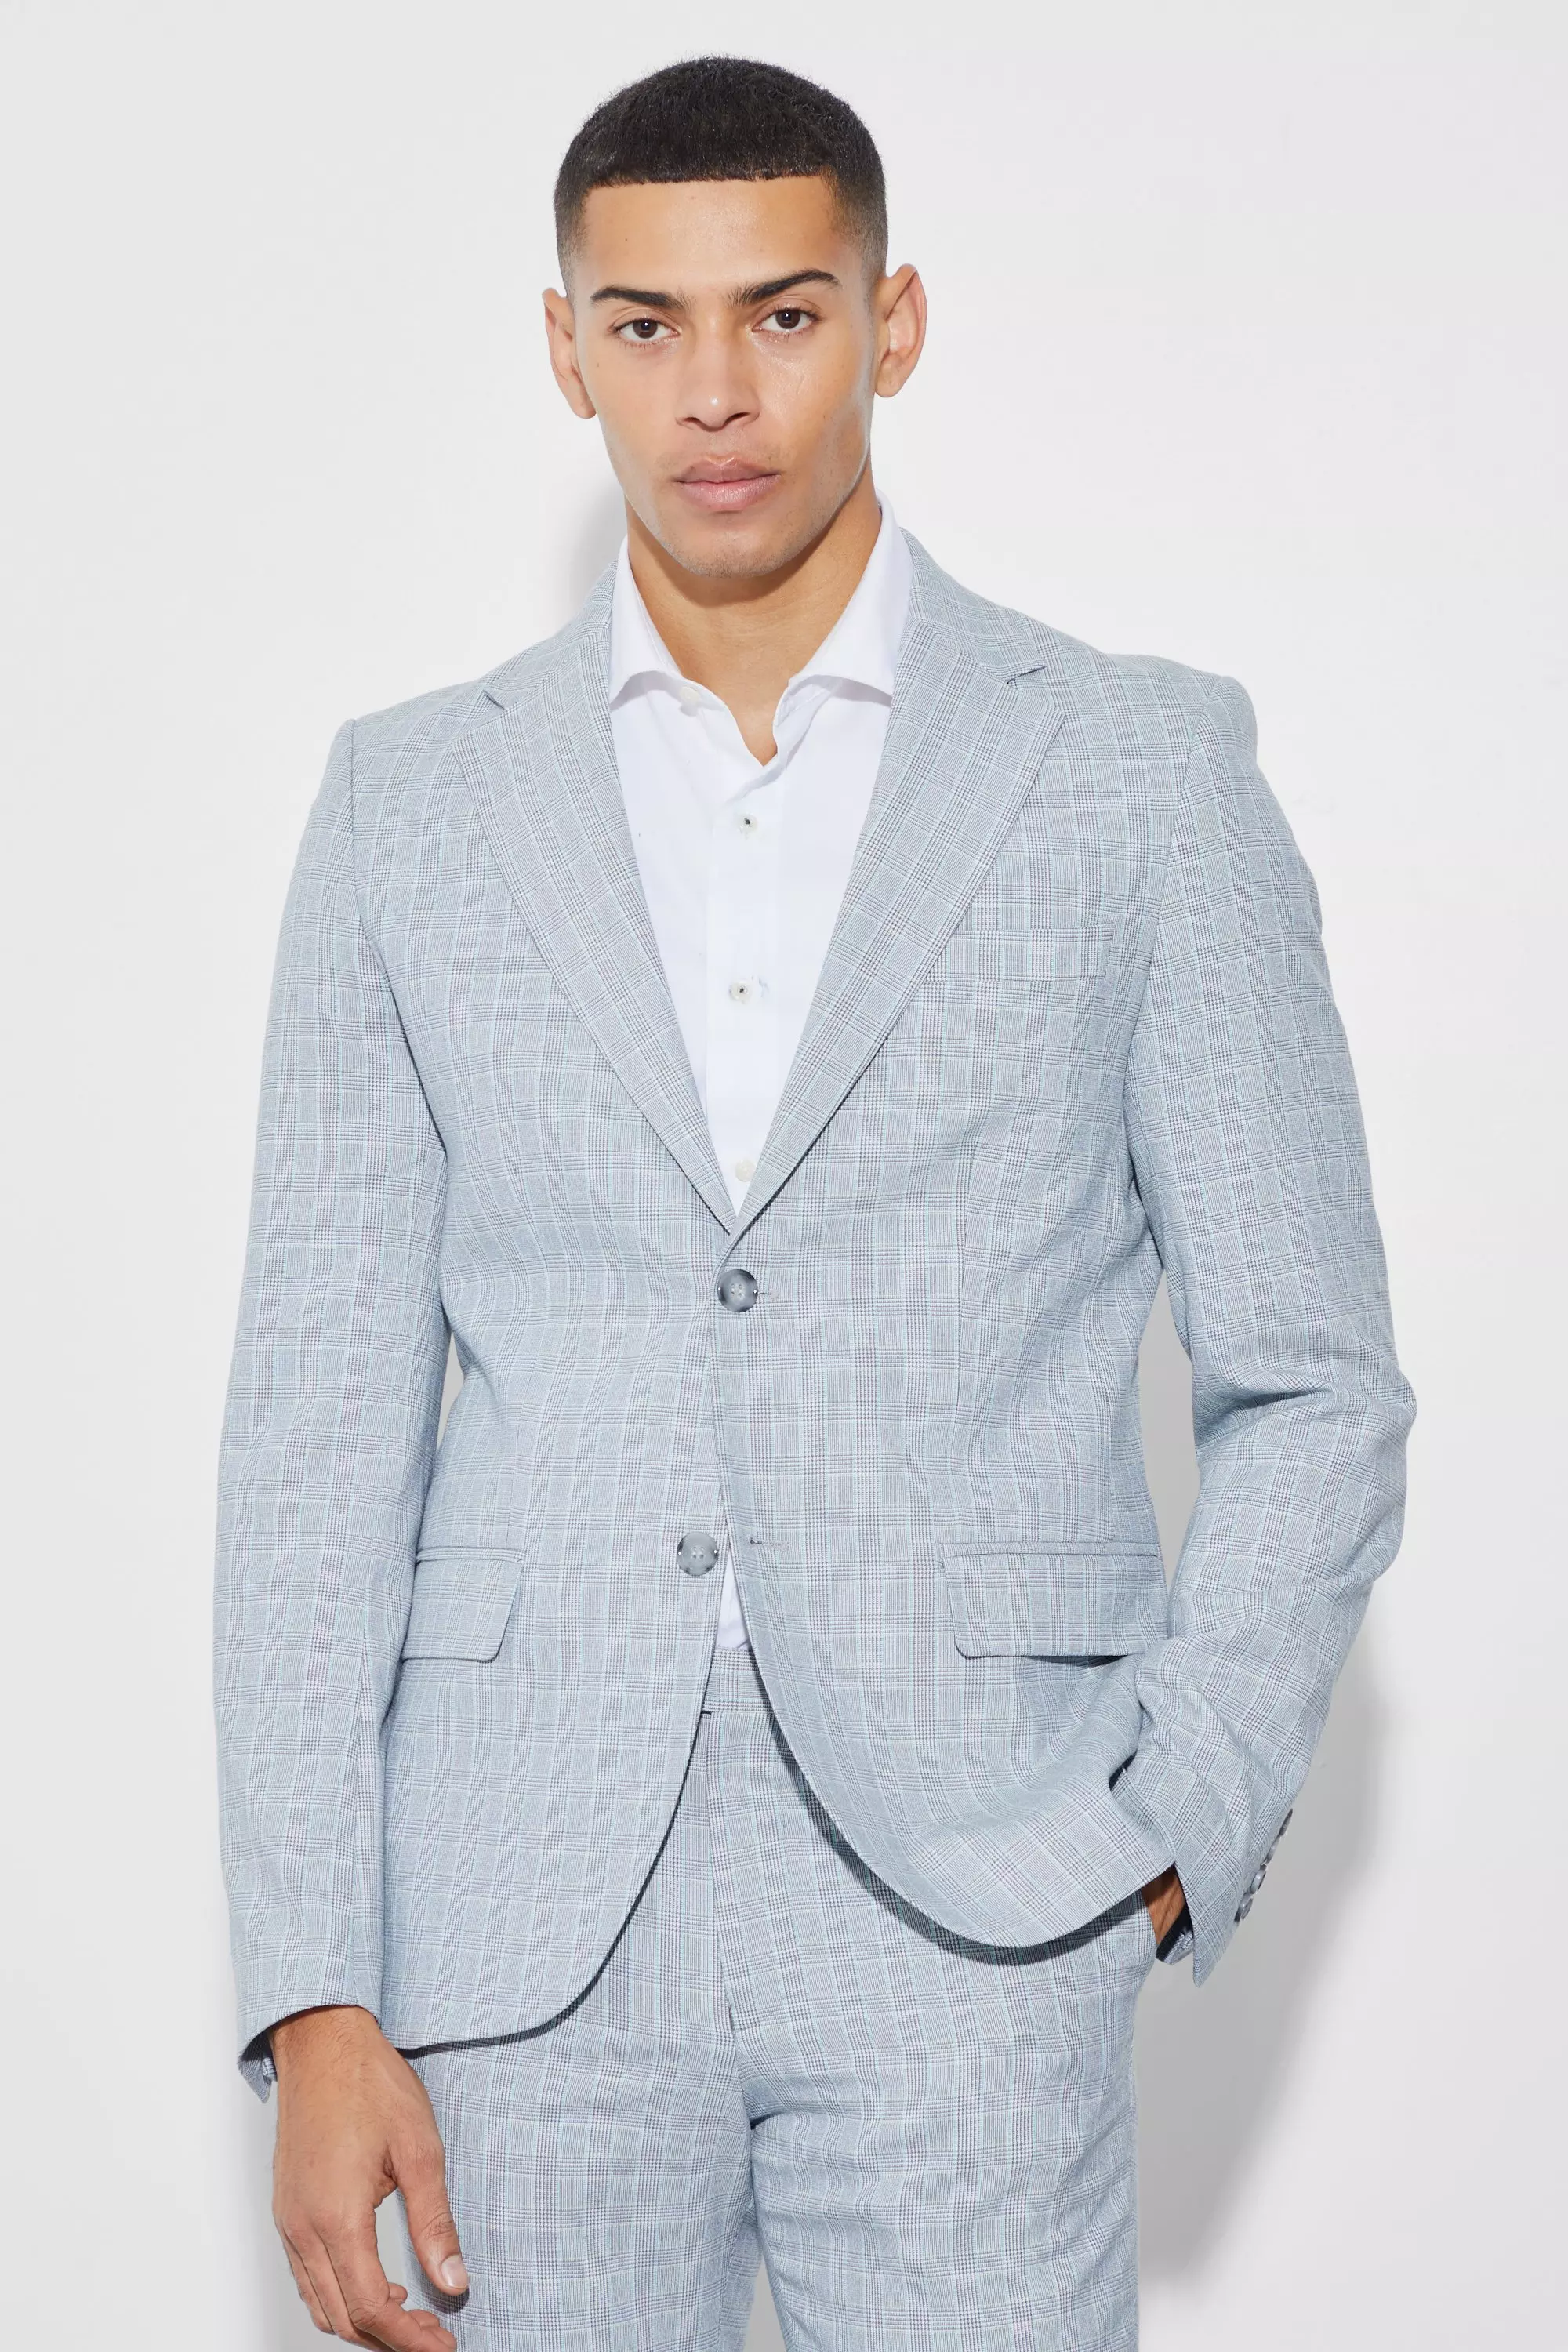 Grey Slim Single Breasted Check Suit Jacket